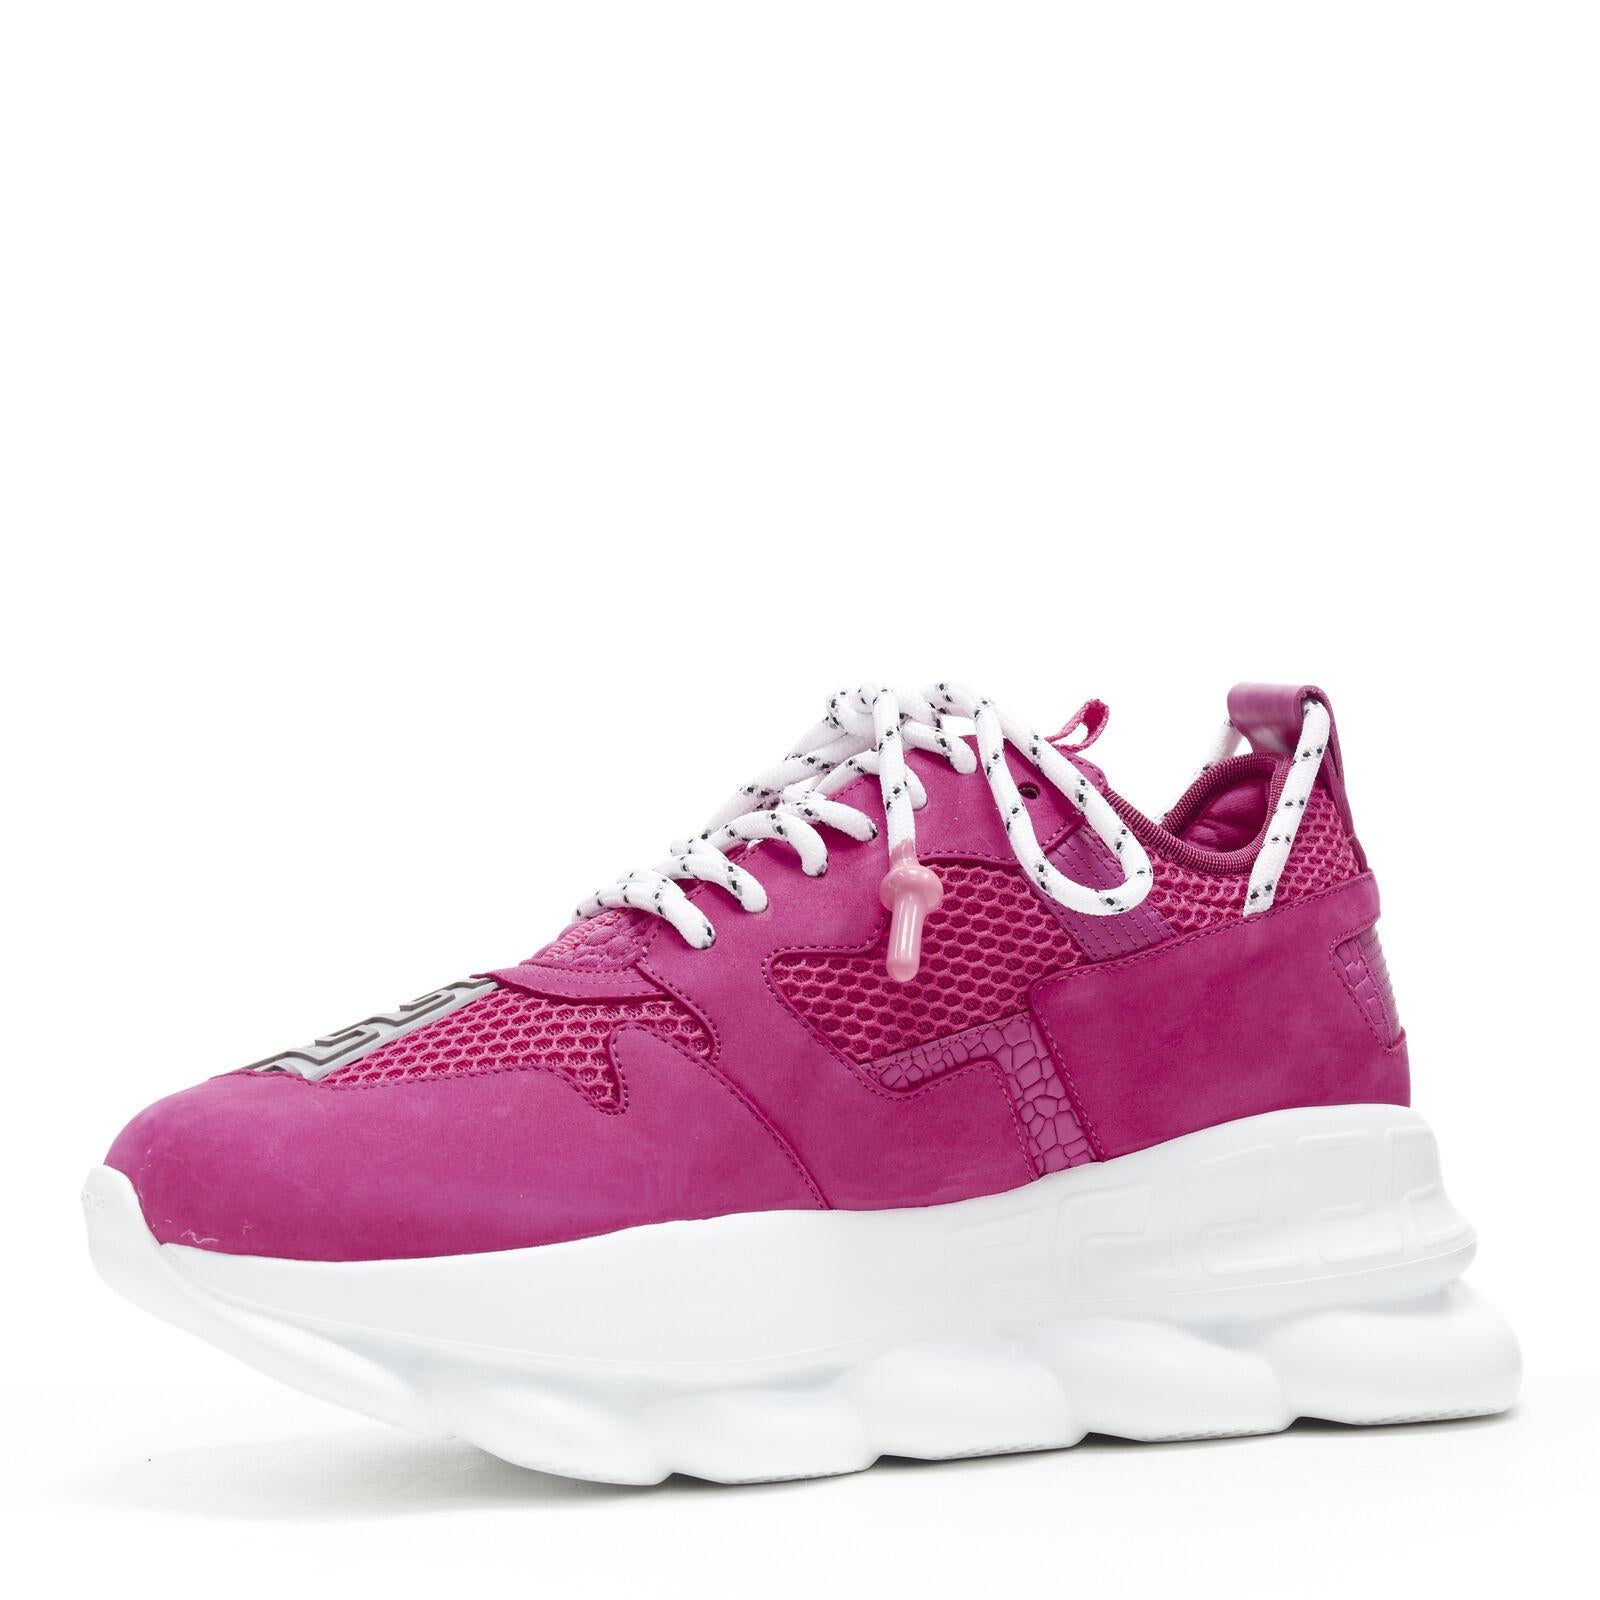 Gray new VERSACE Chain Reaction Blowzy all pink suede low top chunky sneaker EU40.5 For Sale